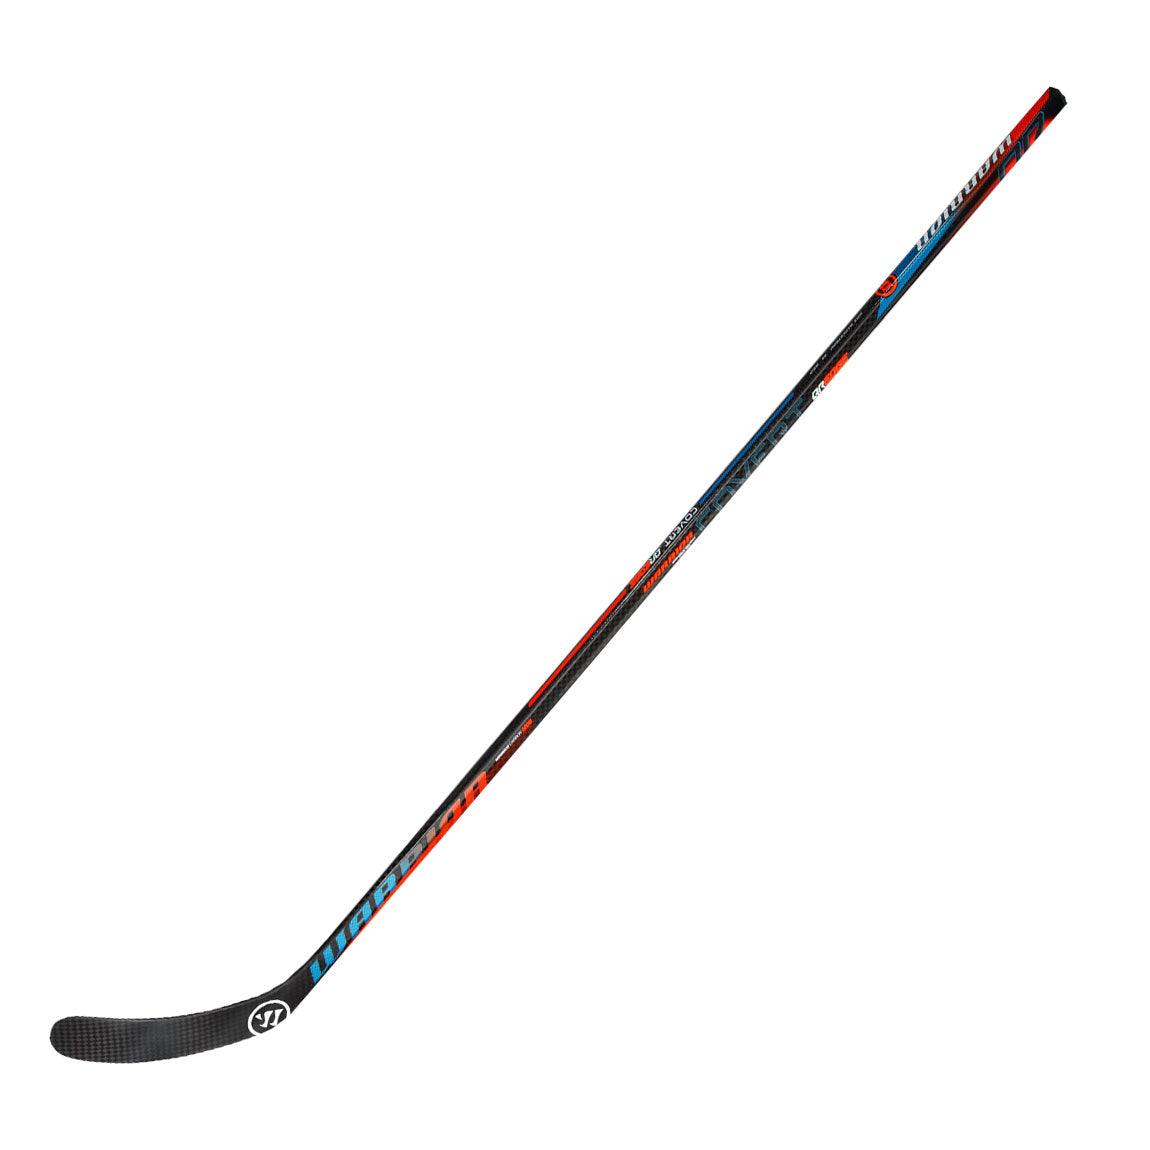 Covert QRE Hockey Stick - Intermediate - Sports Excellence